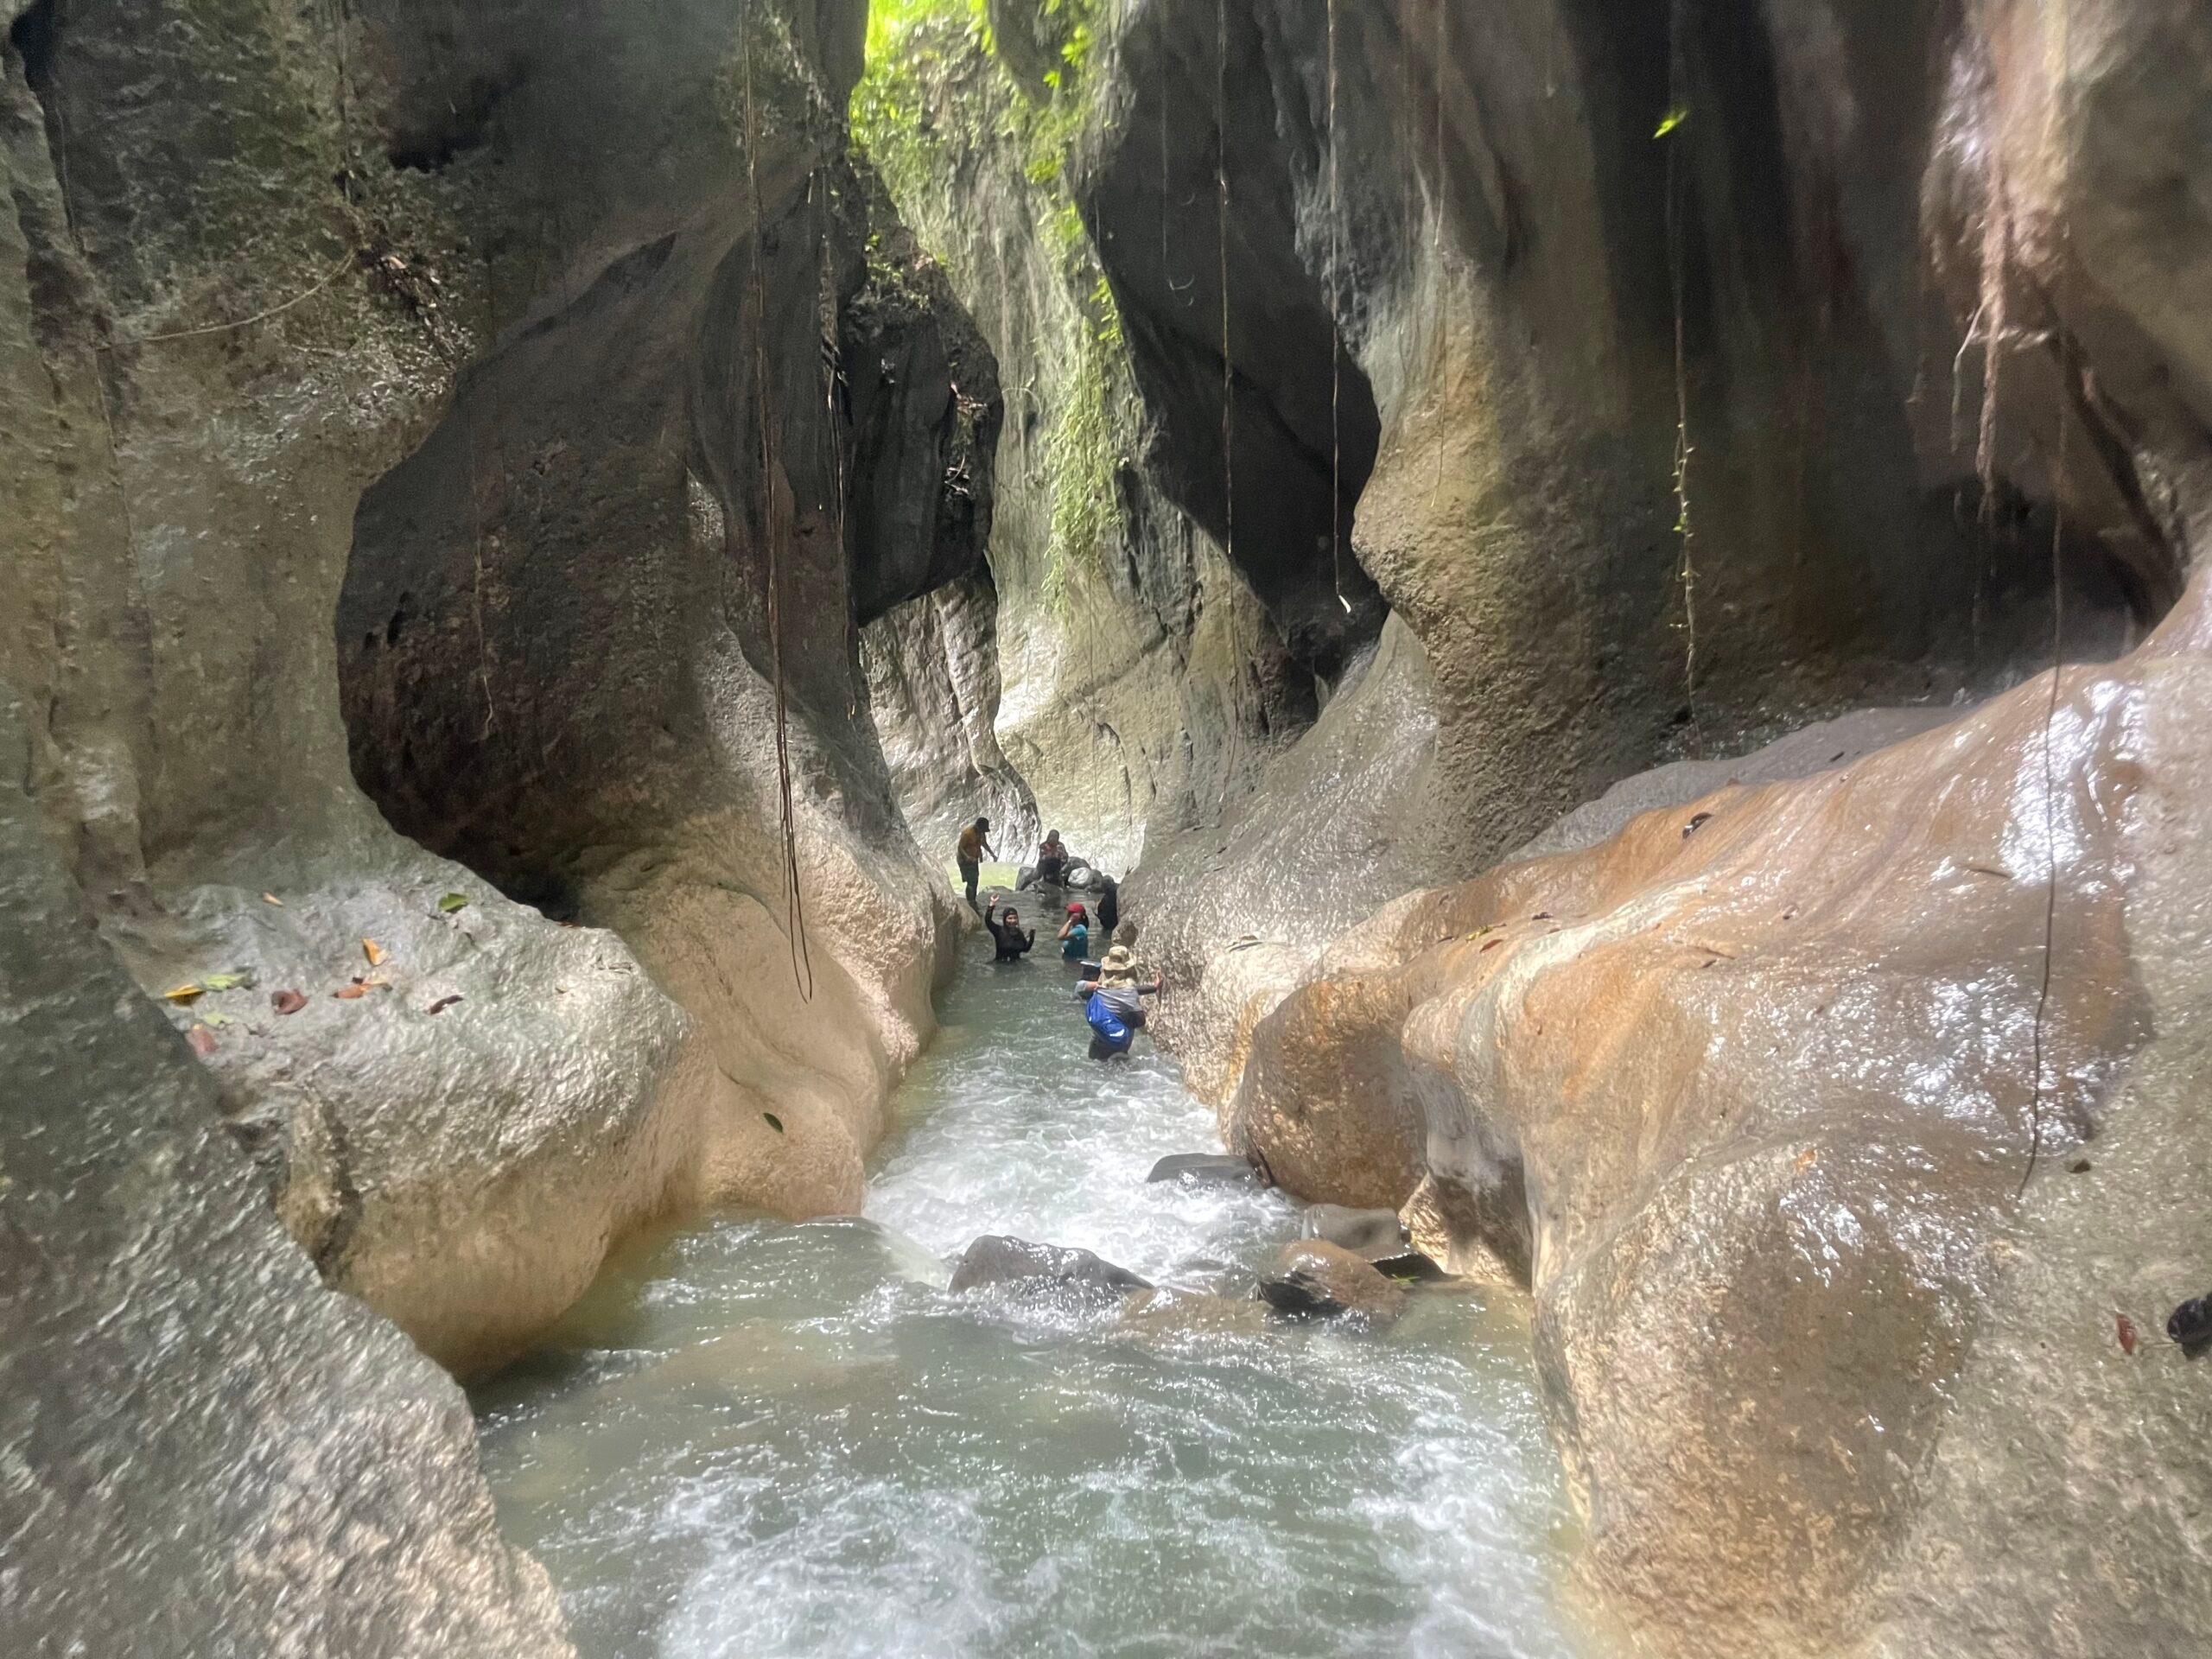 Go canyoneering with Higaonons at Iligan’s Sikyop eco-tourism site